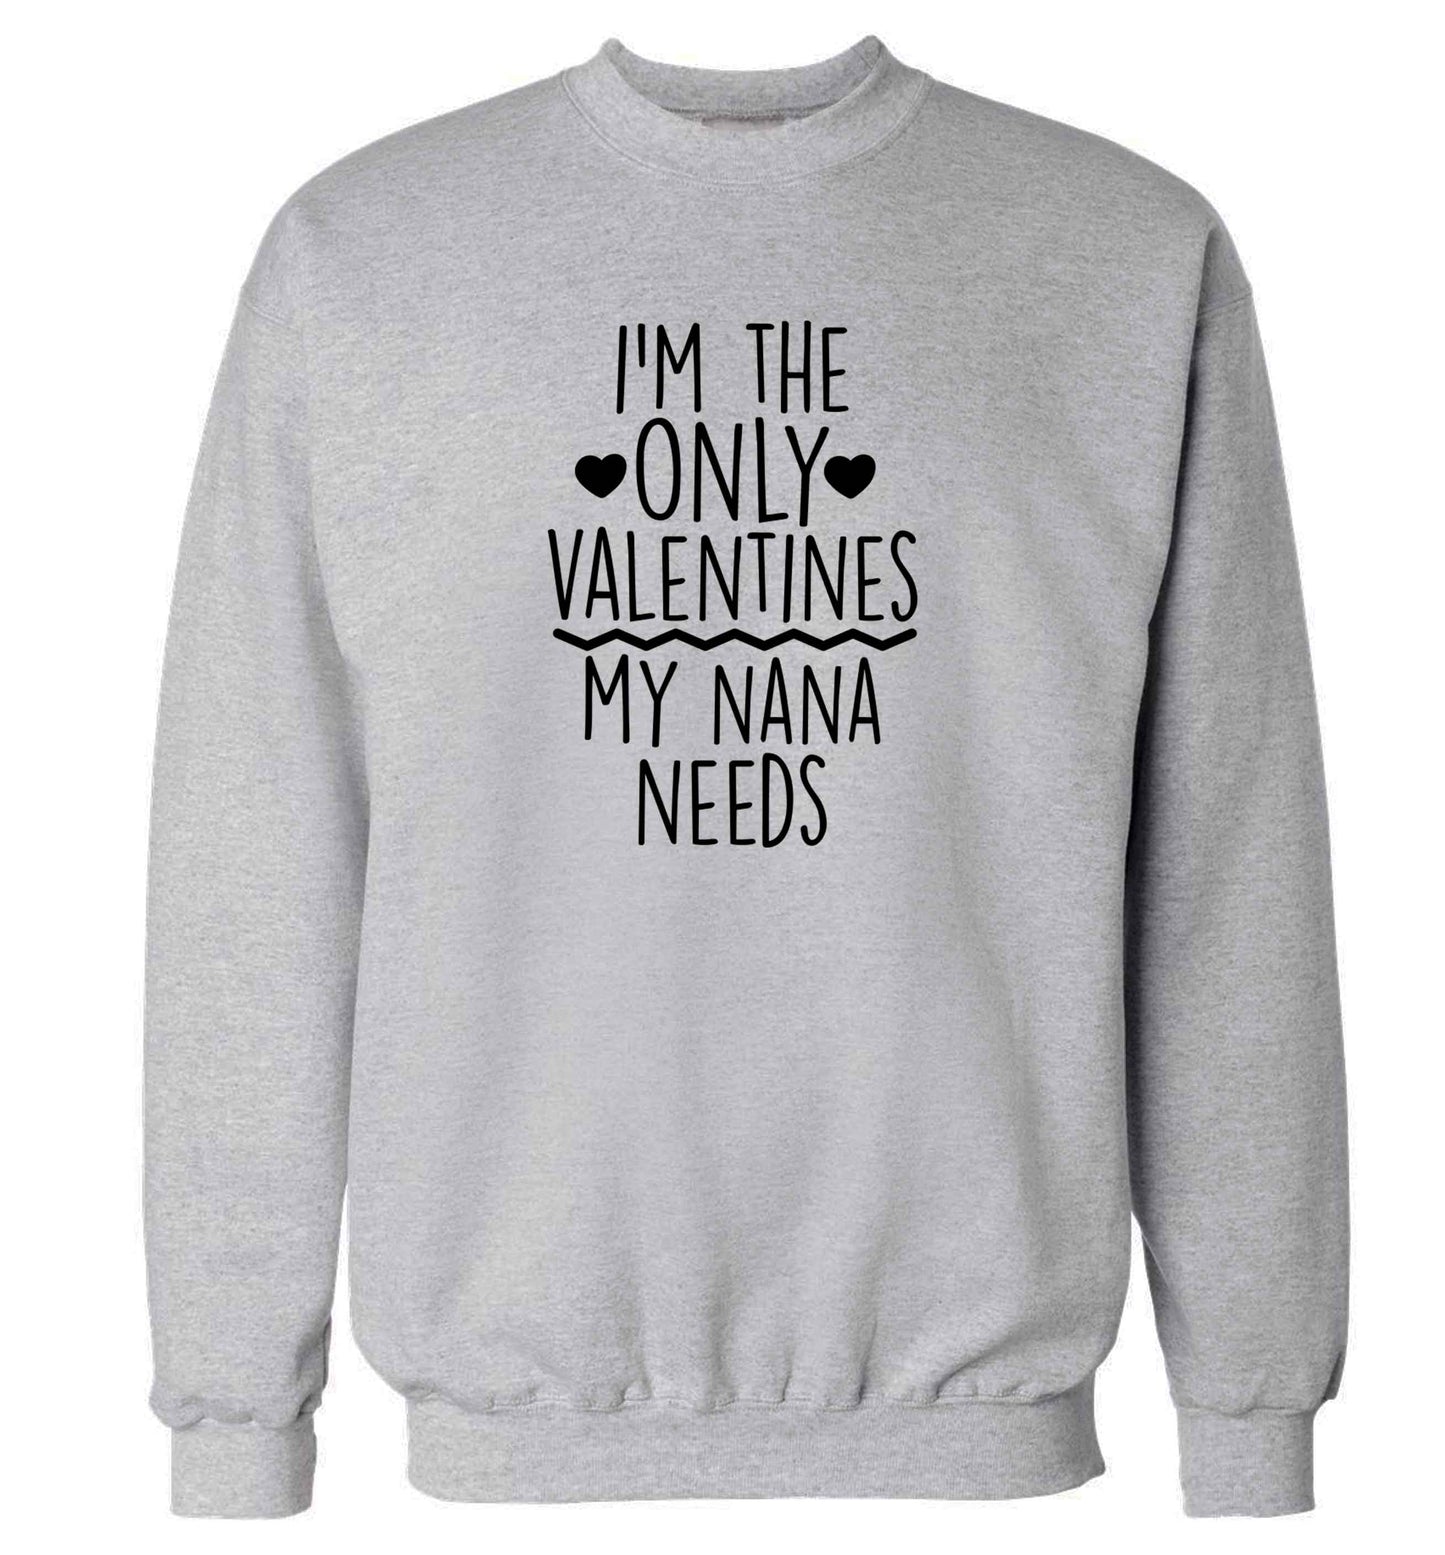 I'm the only valentines my nana needs adult's unisex grey sweater 2XL